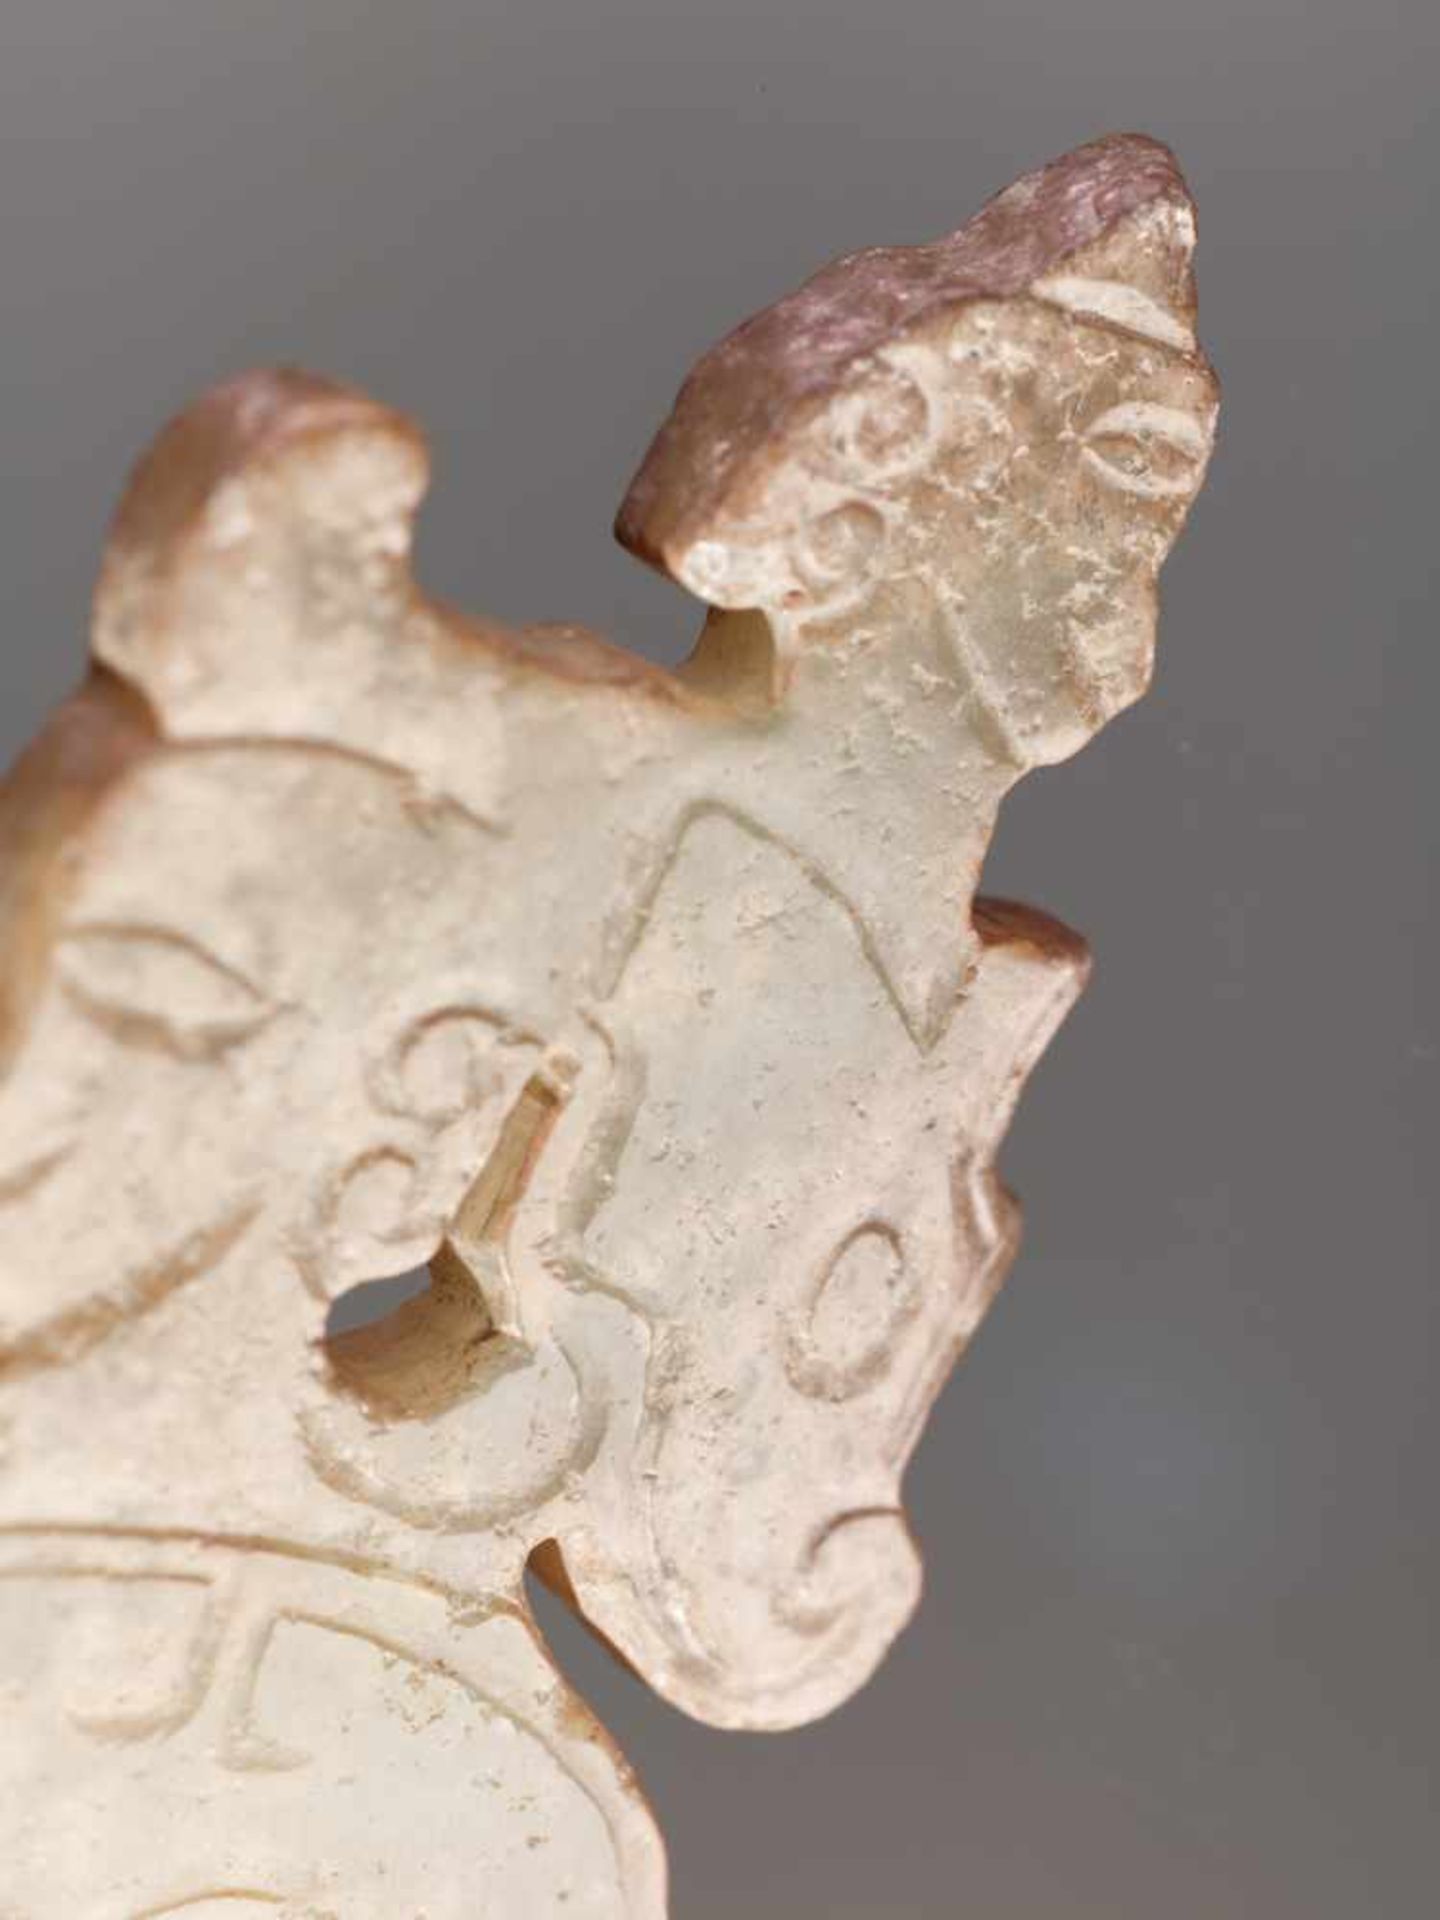 A THIN, FLAT ORNAMENT WITH A COMPOSITE PATTERN OF HUMAN HEADS AND DRAGONS Jade. China, Western Zhou, - Image 7 of 11